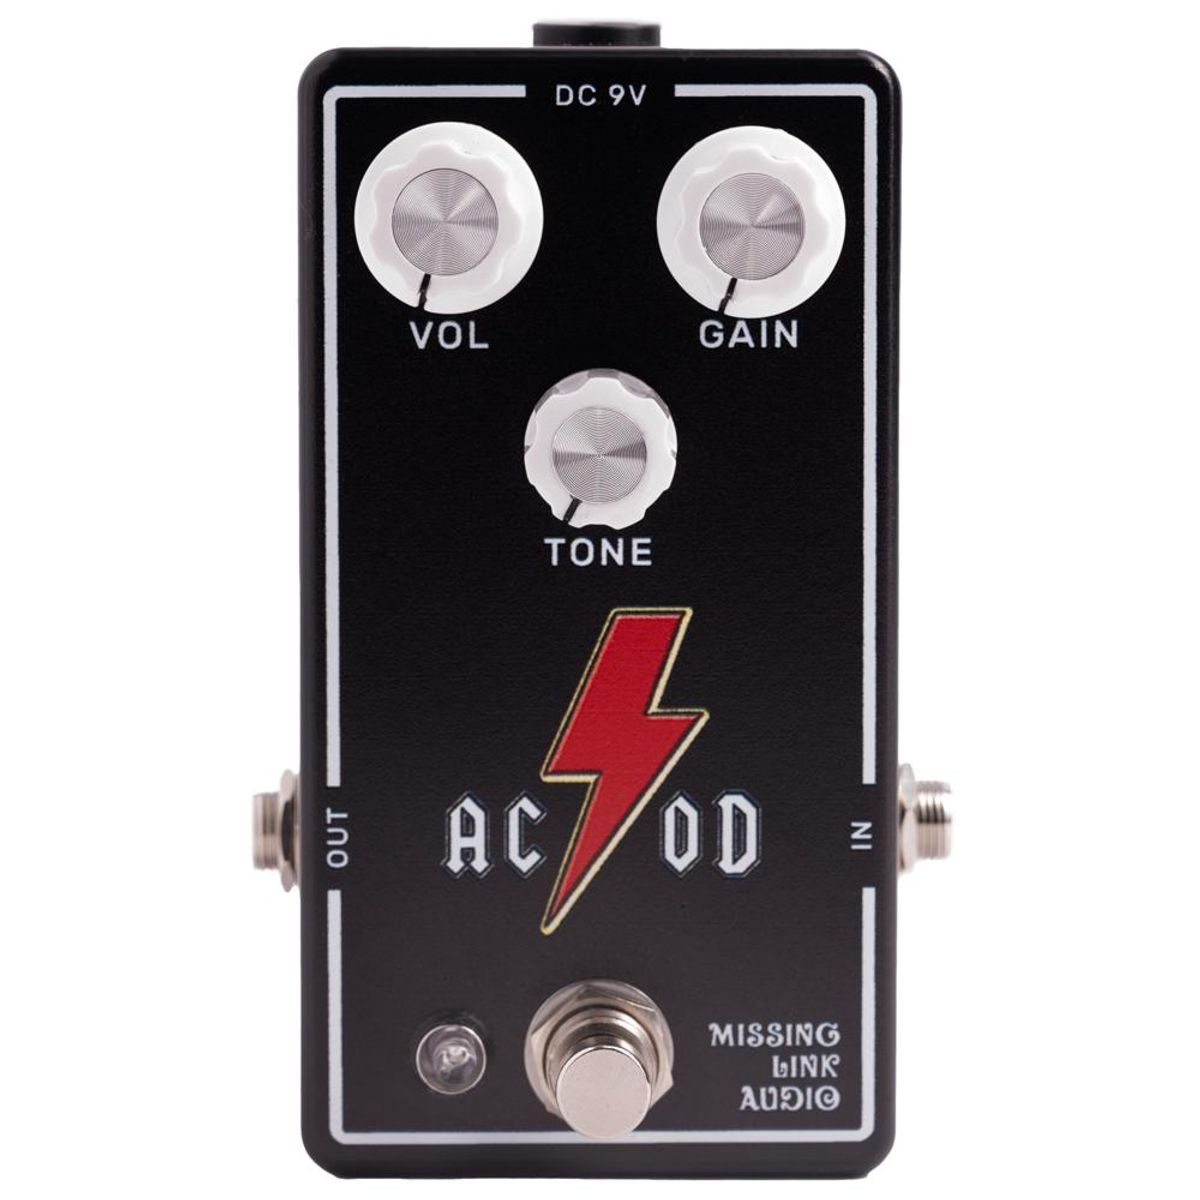 Missing Link Audio Unveils AC/OD Pedal